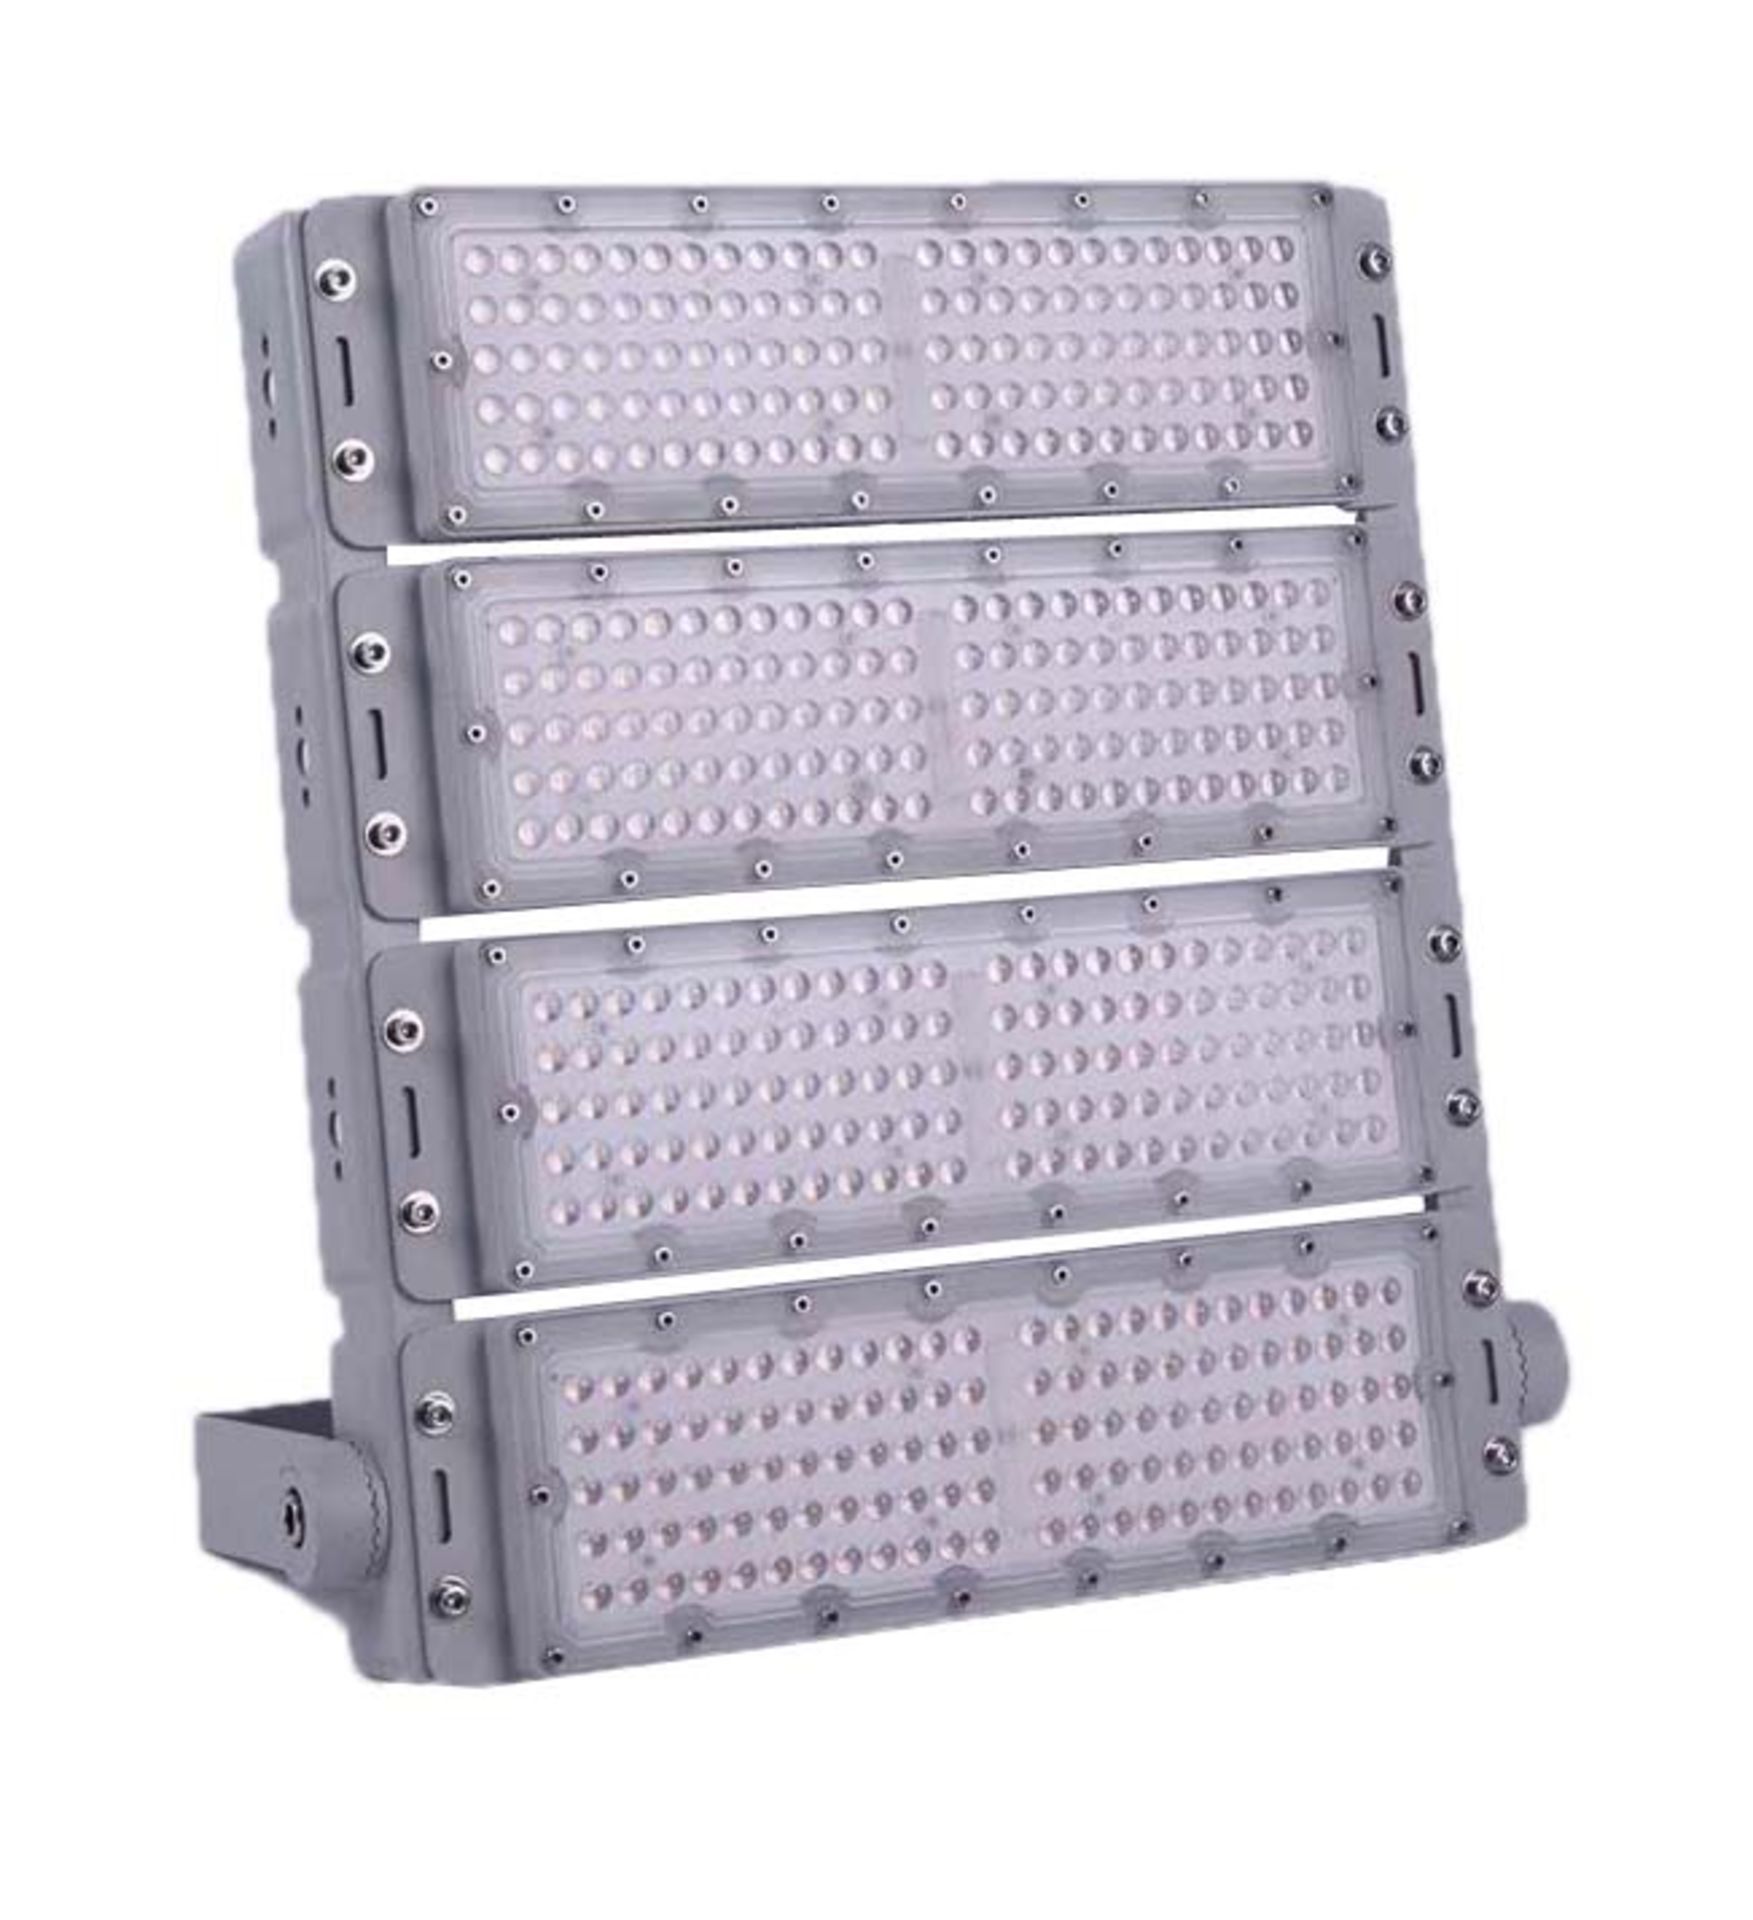 3 x LED400 Watt Flood Light Panel - For Car Parks, Security, Playing fields, Football pitches etc - Image 5 of 8